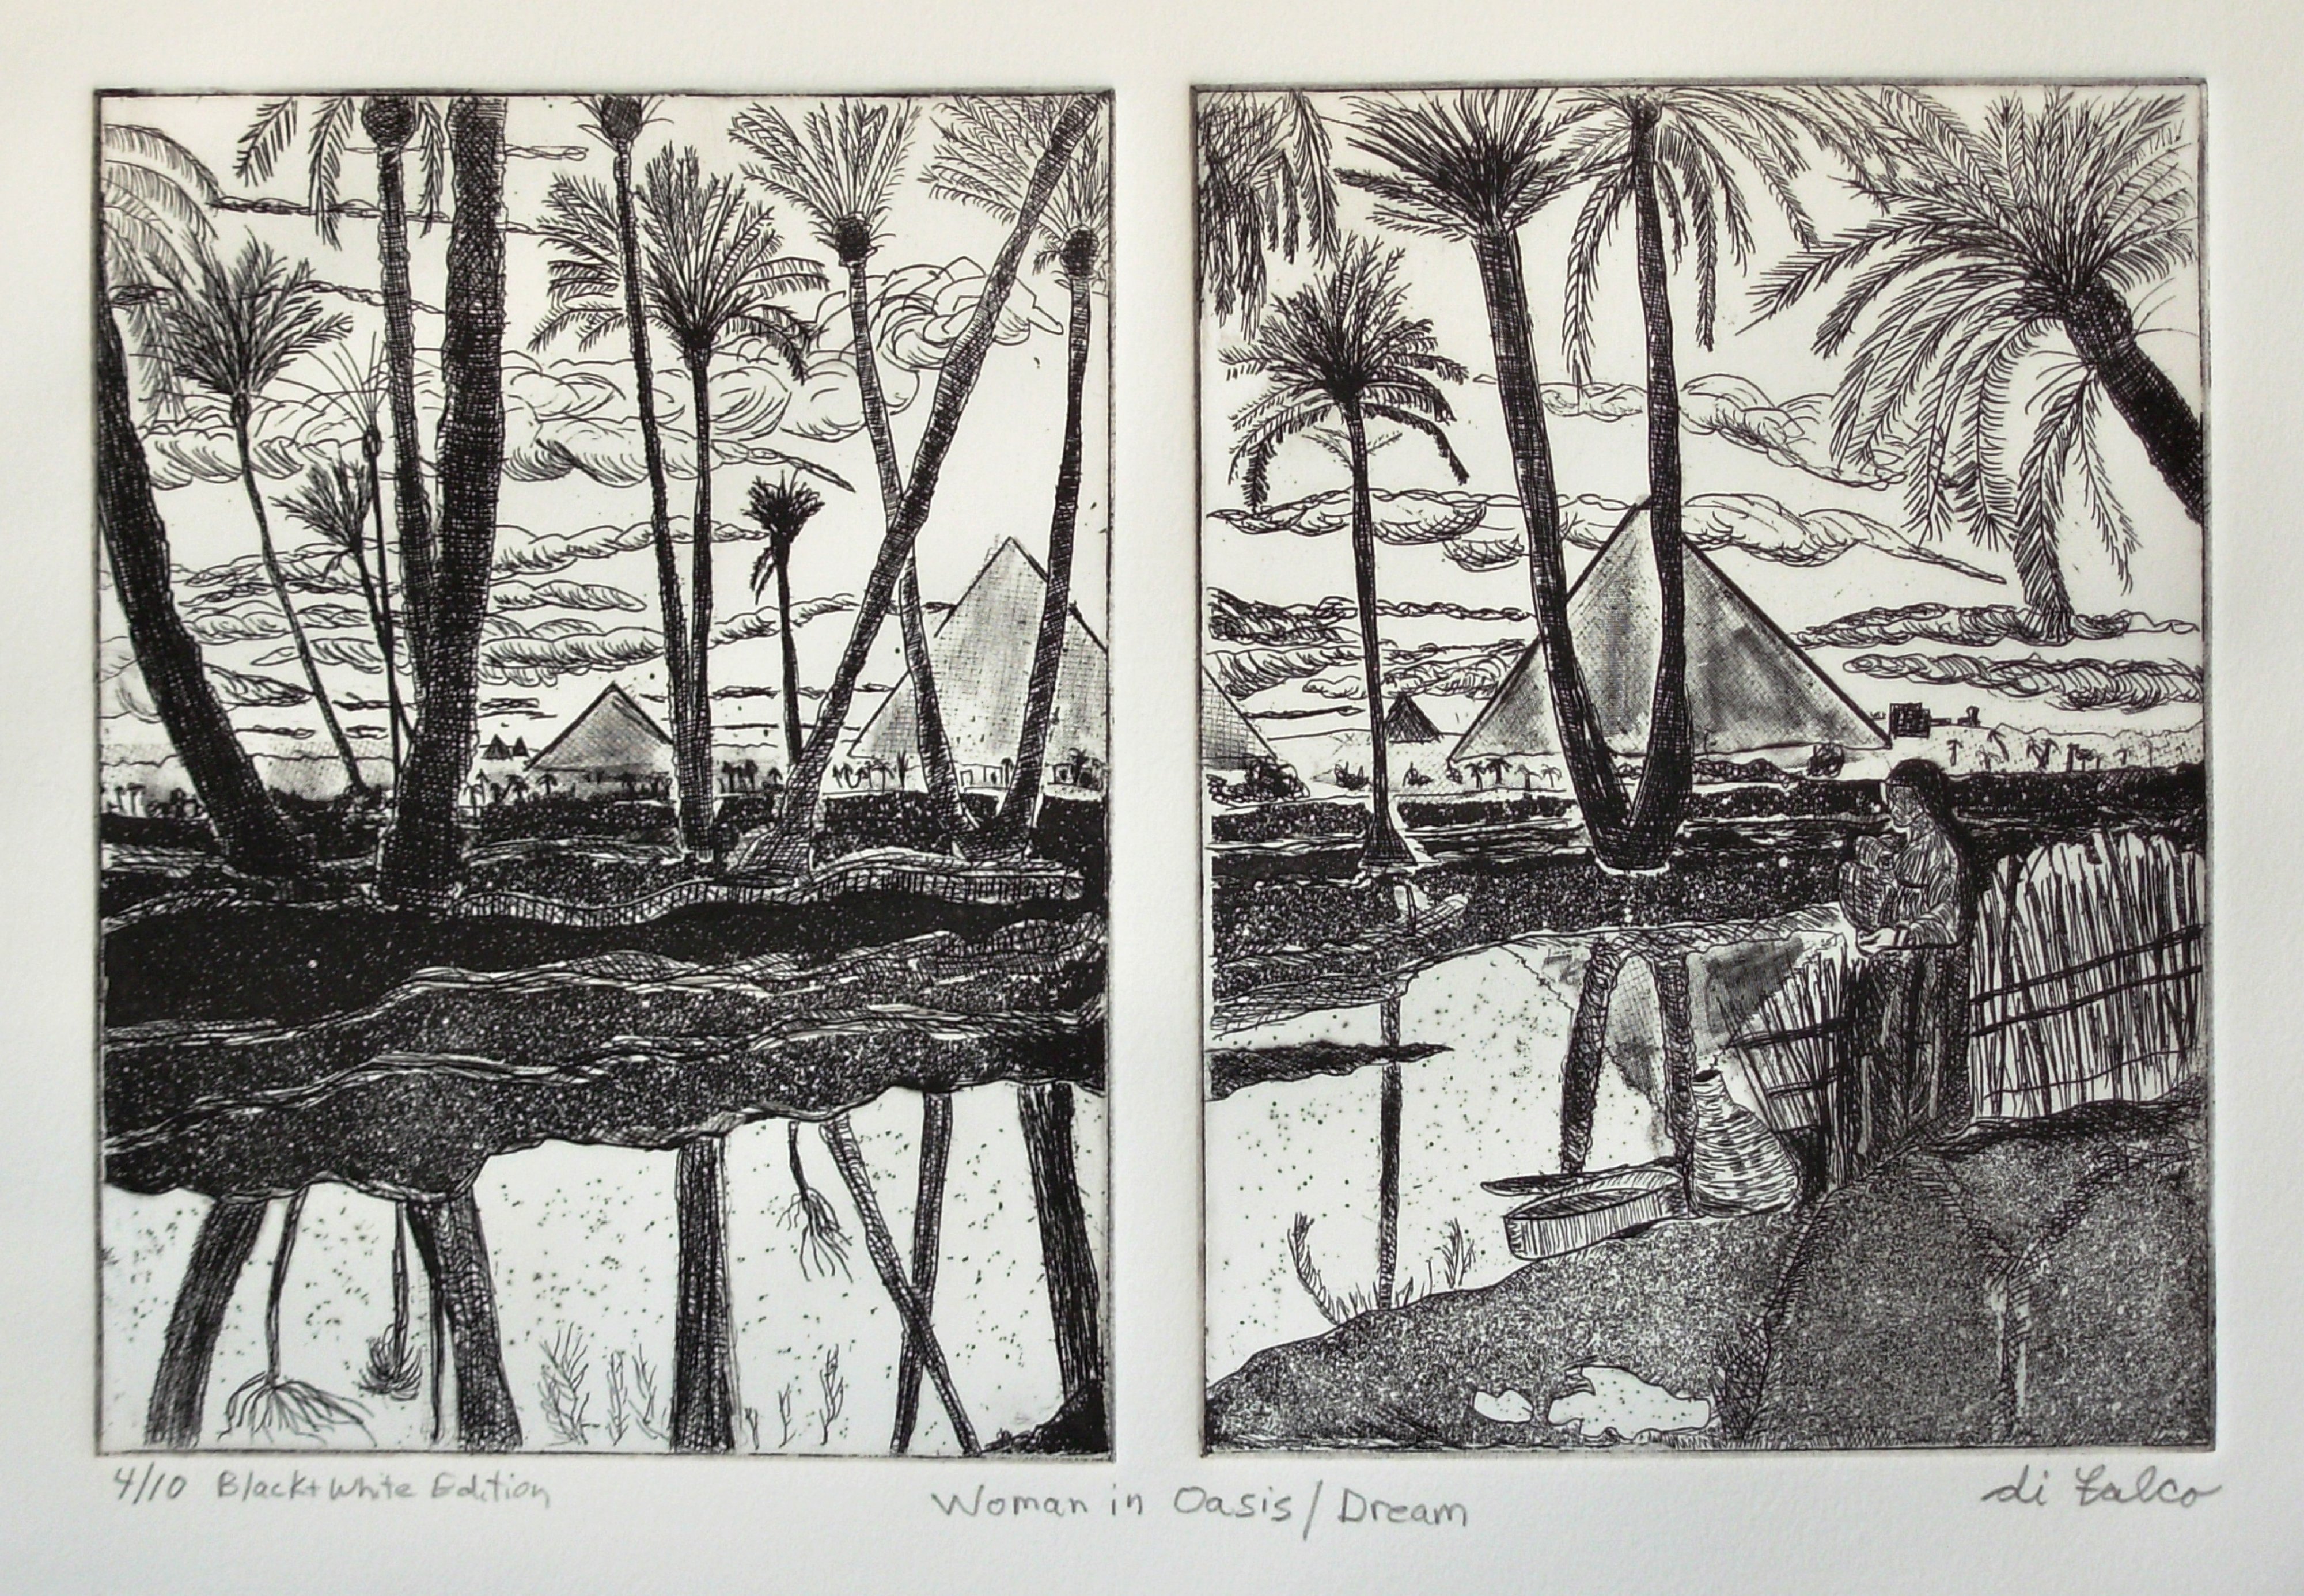 Jerry  Di Falco: 'Woman in Egyptian Oasis in Black and White', 2012 Etching, Landmarks. Woman in Egyptian Oasis in Black and White.  I employed two zinc plates to produce this single image. Part of the reason I use multiple plates relates to the concept of SEEING LIFE THROUGH A WINDOW VIA ART. In other words, a window frame shape entices the viewer to see ...